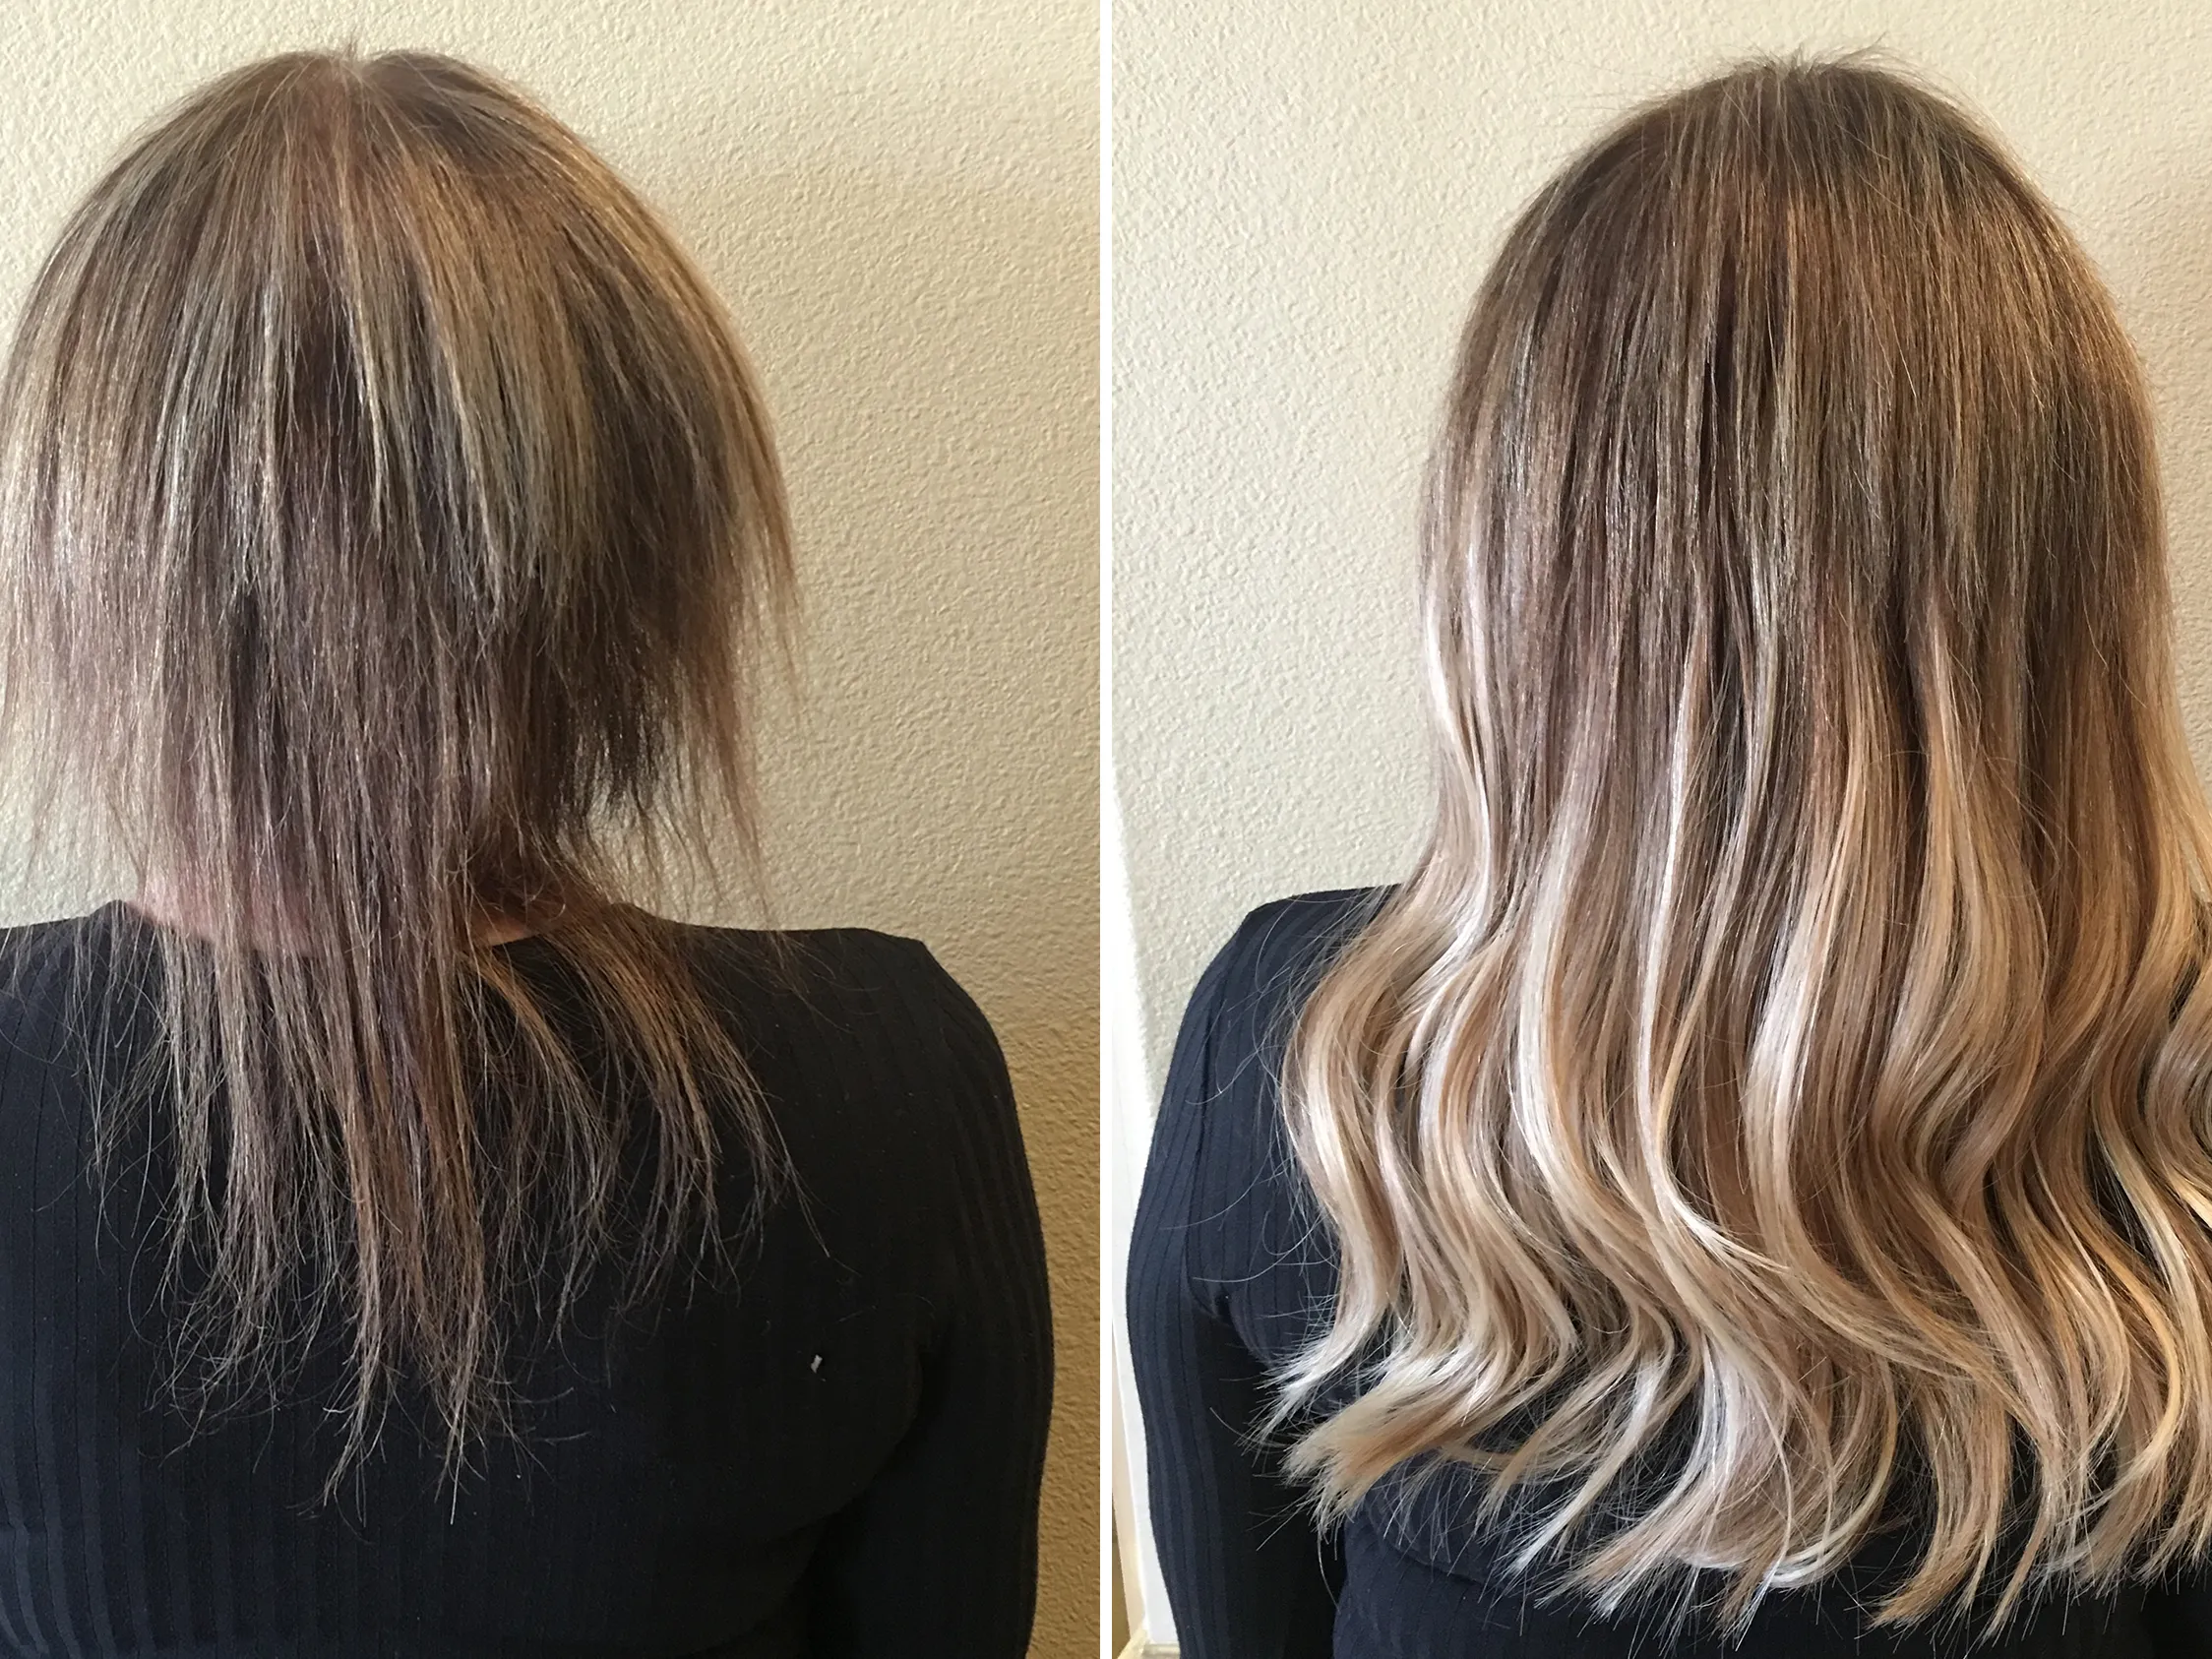 The Amazing Transformation: Hair Extensions Before and After